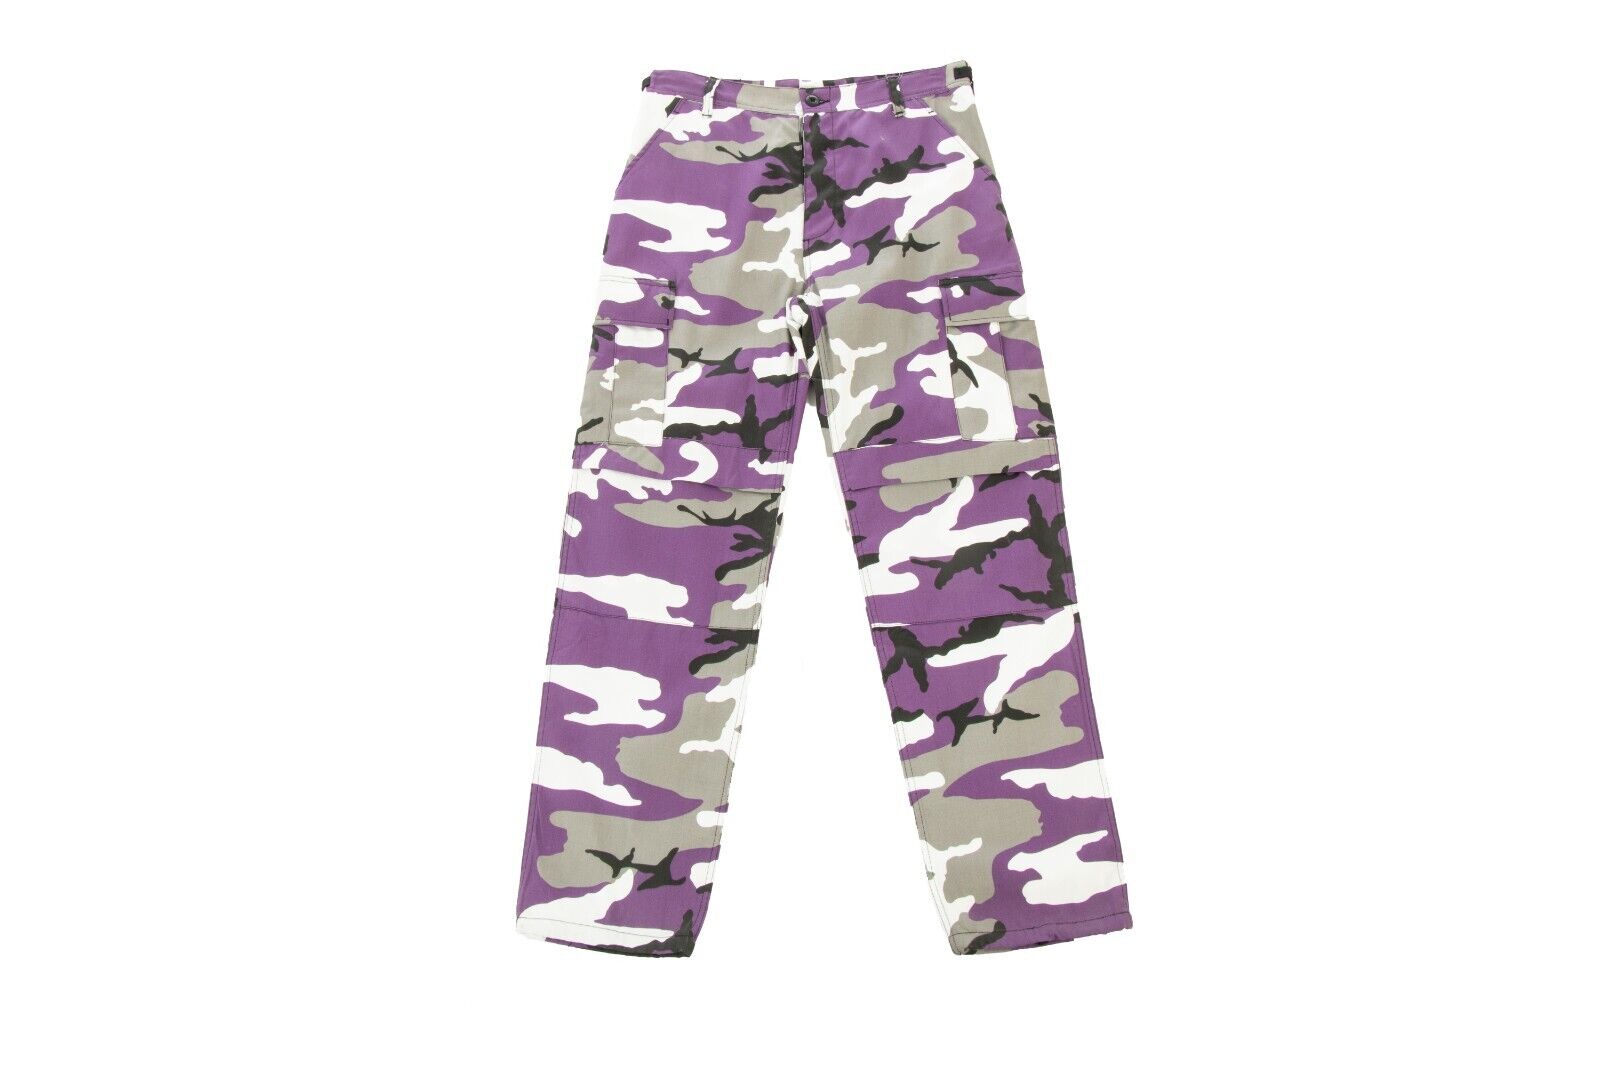 Army Style Purple / Lilac Camo Combat Trouser Cargo Pants BDU Work Outdoor